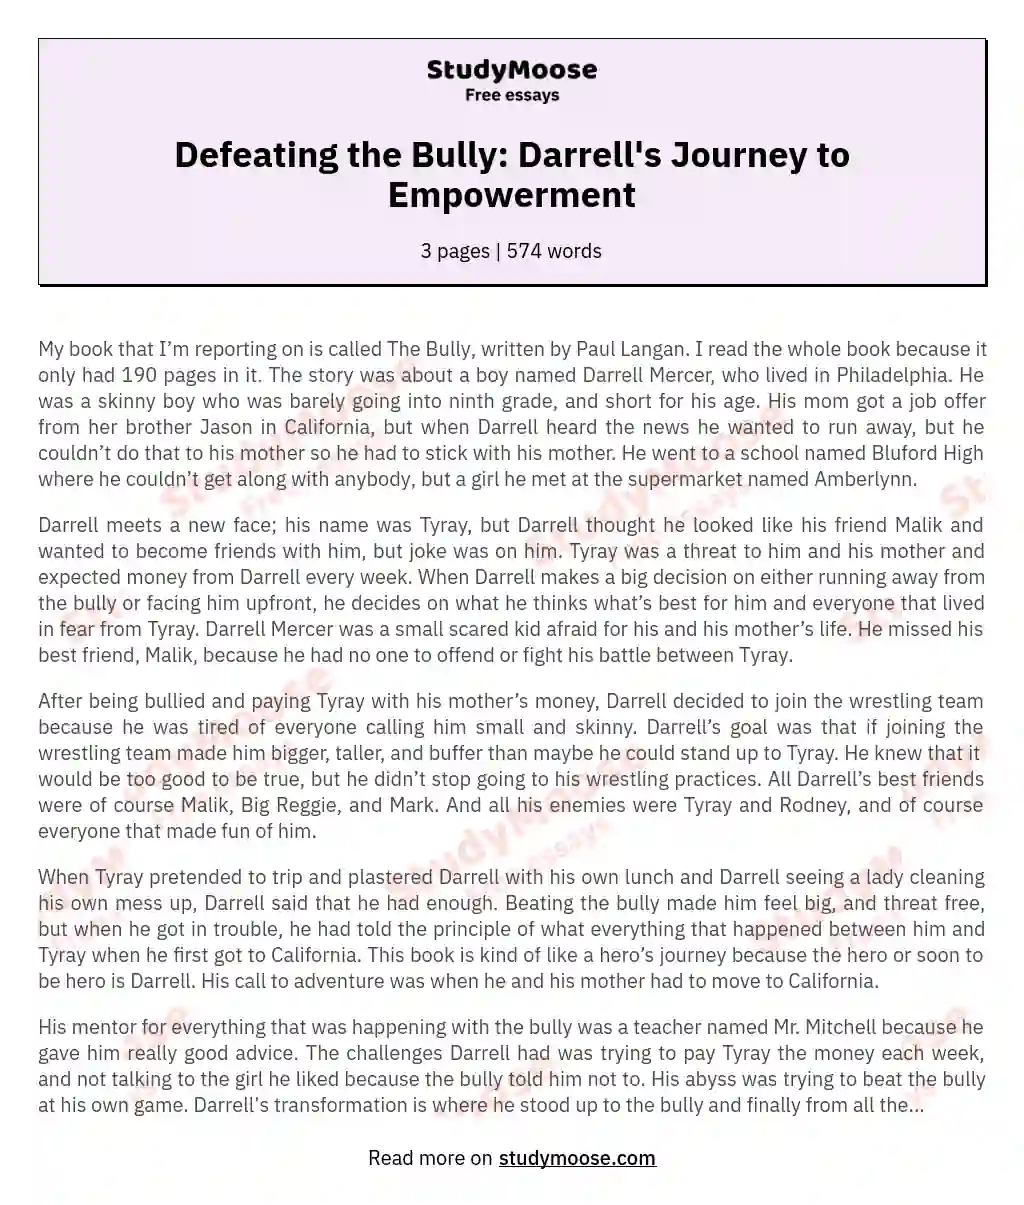 Defeating the Bully: Darrell's Journey to Empowerment essay